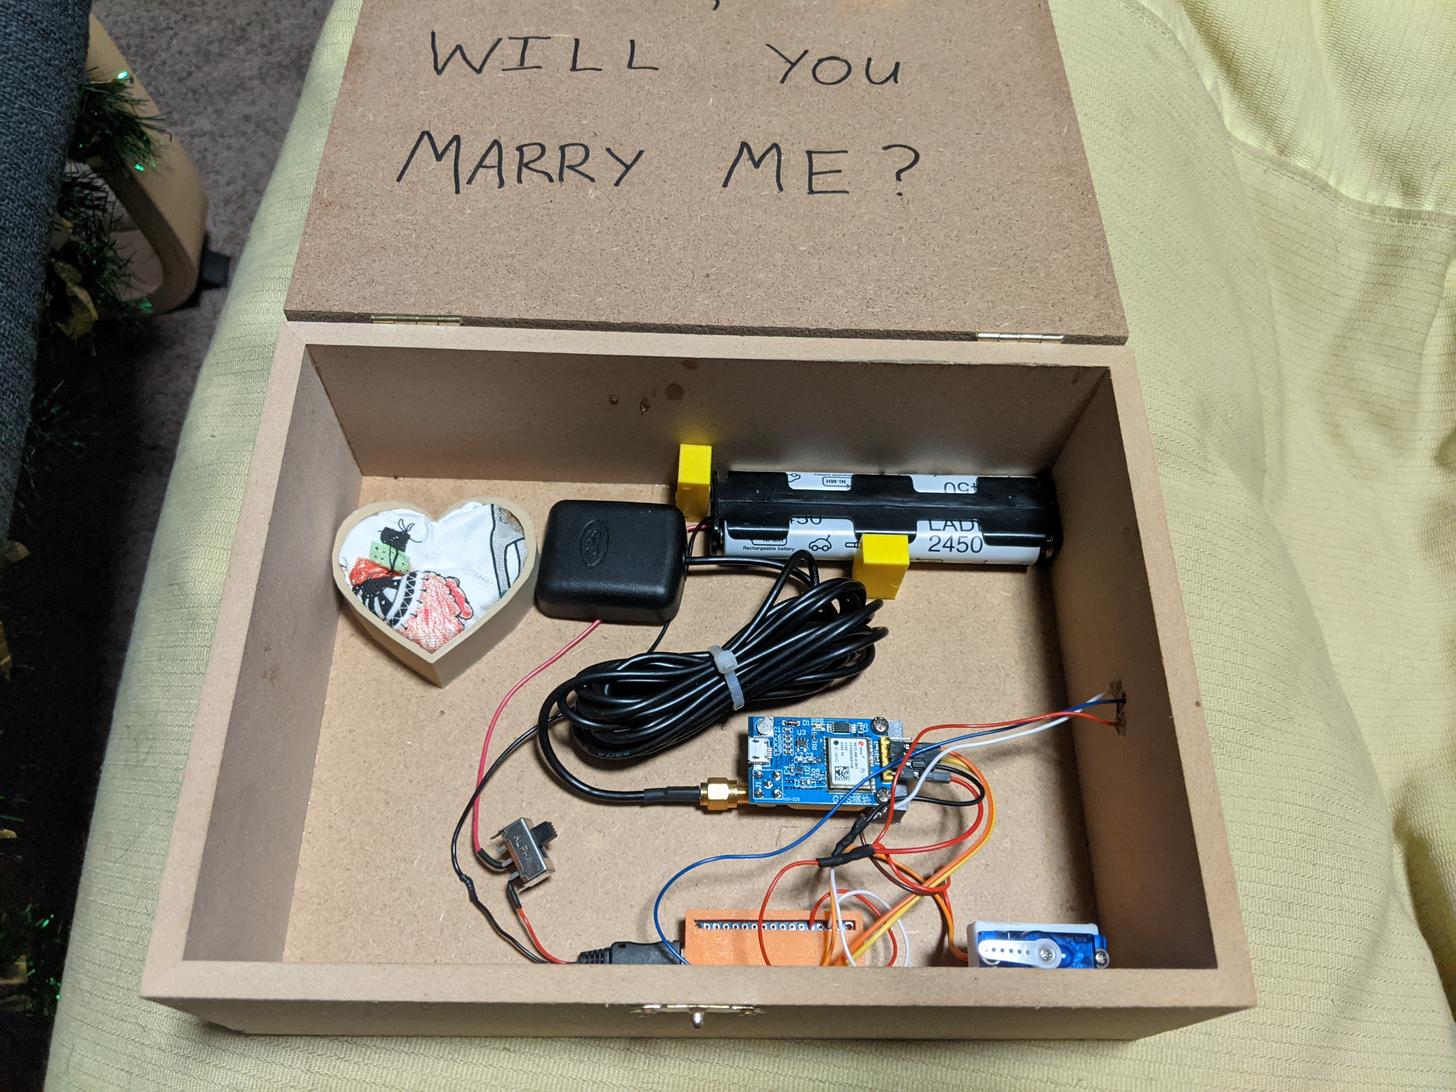 Arduino-powered puzzle boxes help pop the question